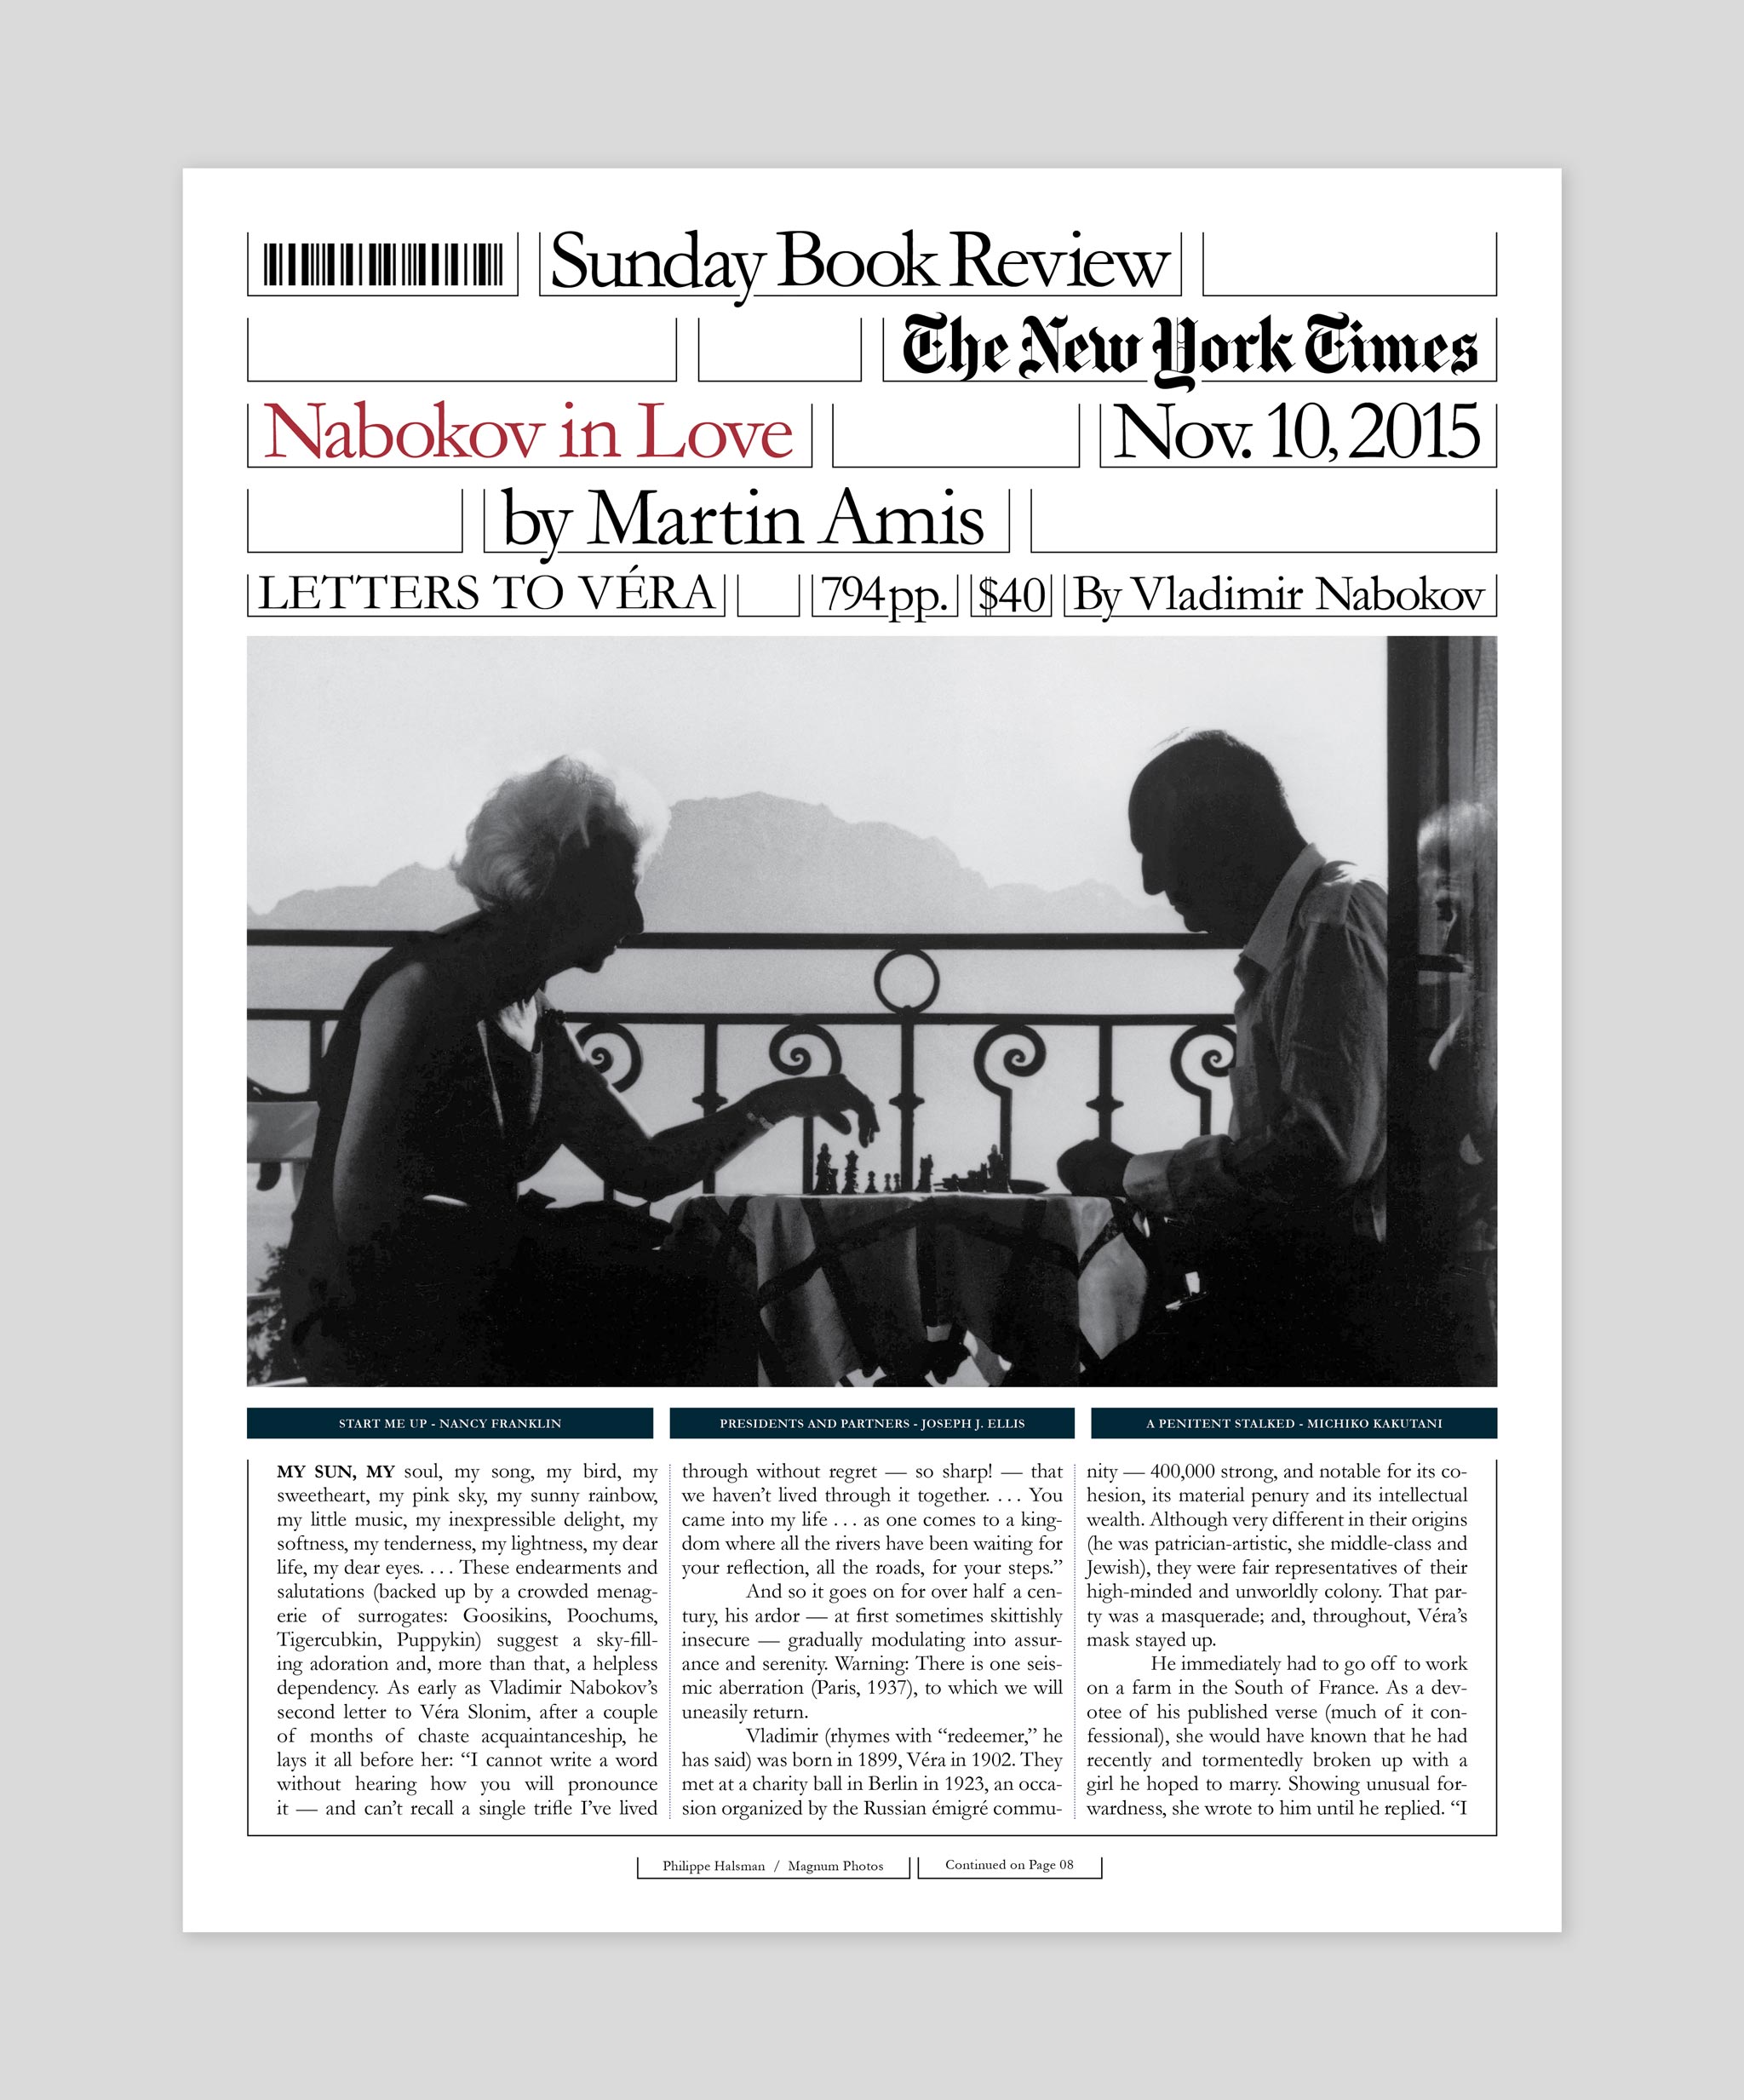 nytimes sunday book review